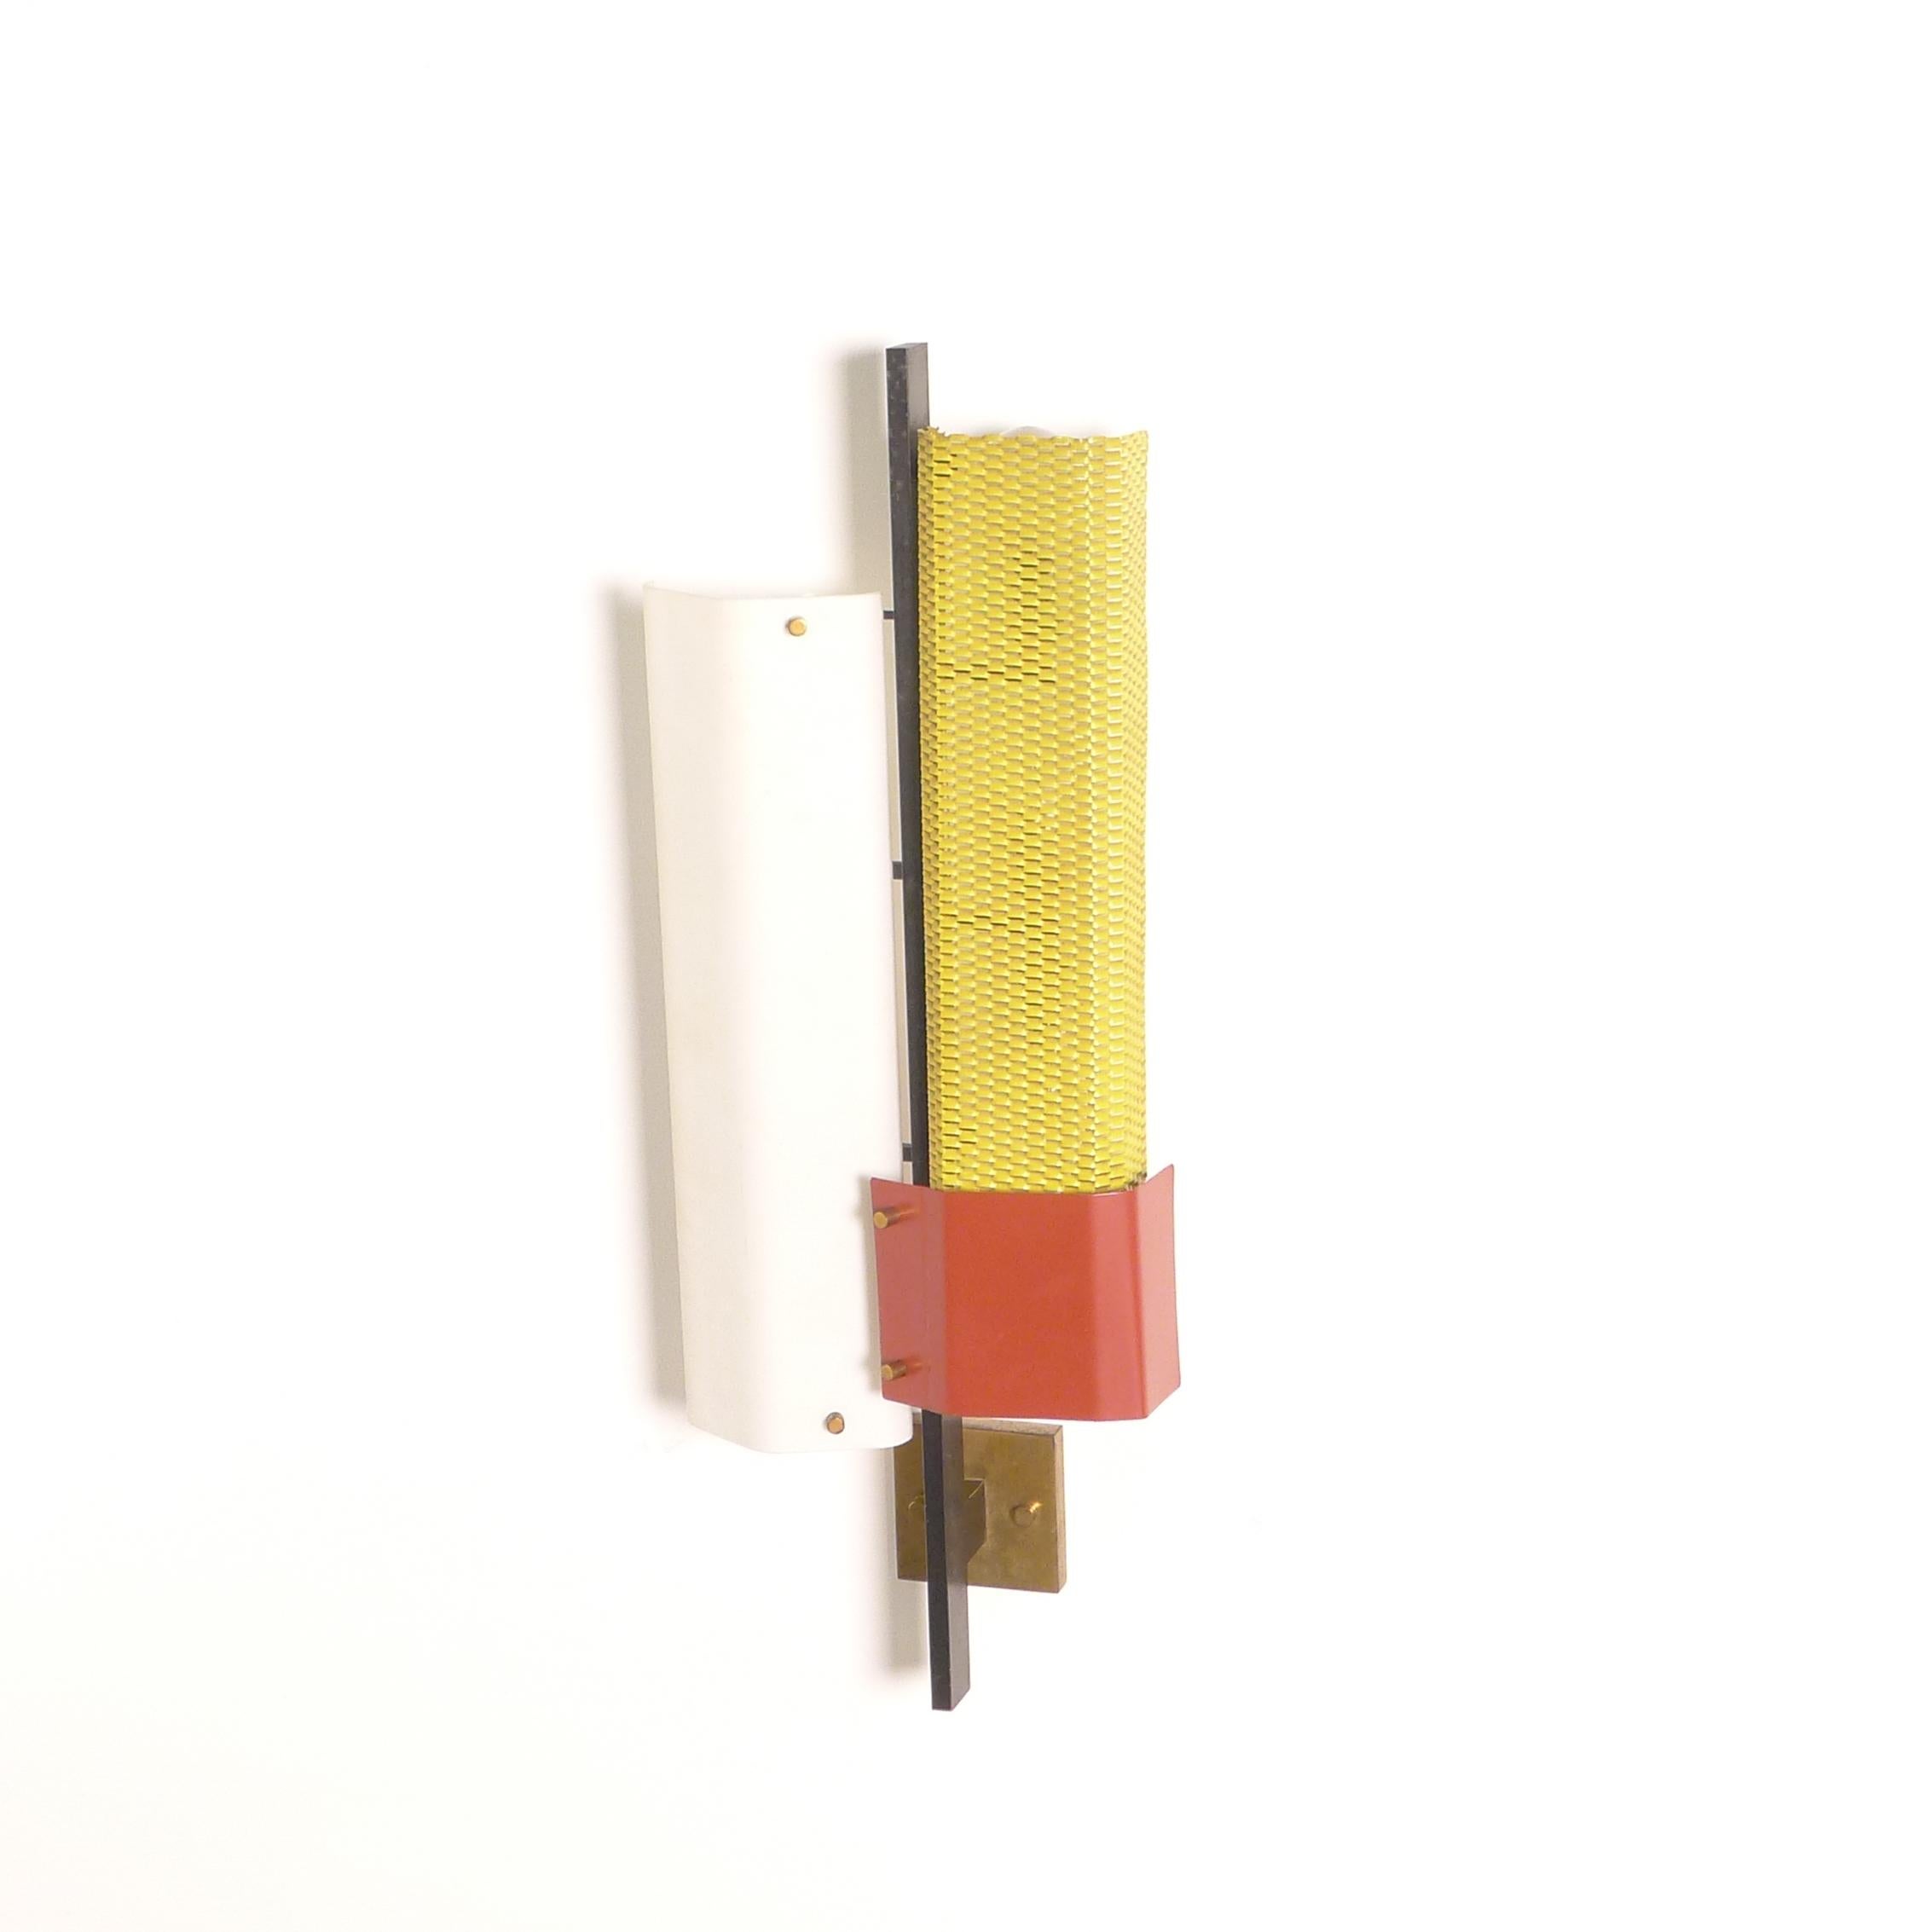 Original 1950s vintage wall light or sconce, made by Lumi and likely designed by Oscar Torlasco.

Constructed with a white painted metal panel and a yellow painted metal mesh panel with red base to each side of a metal support, with brass rivets and